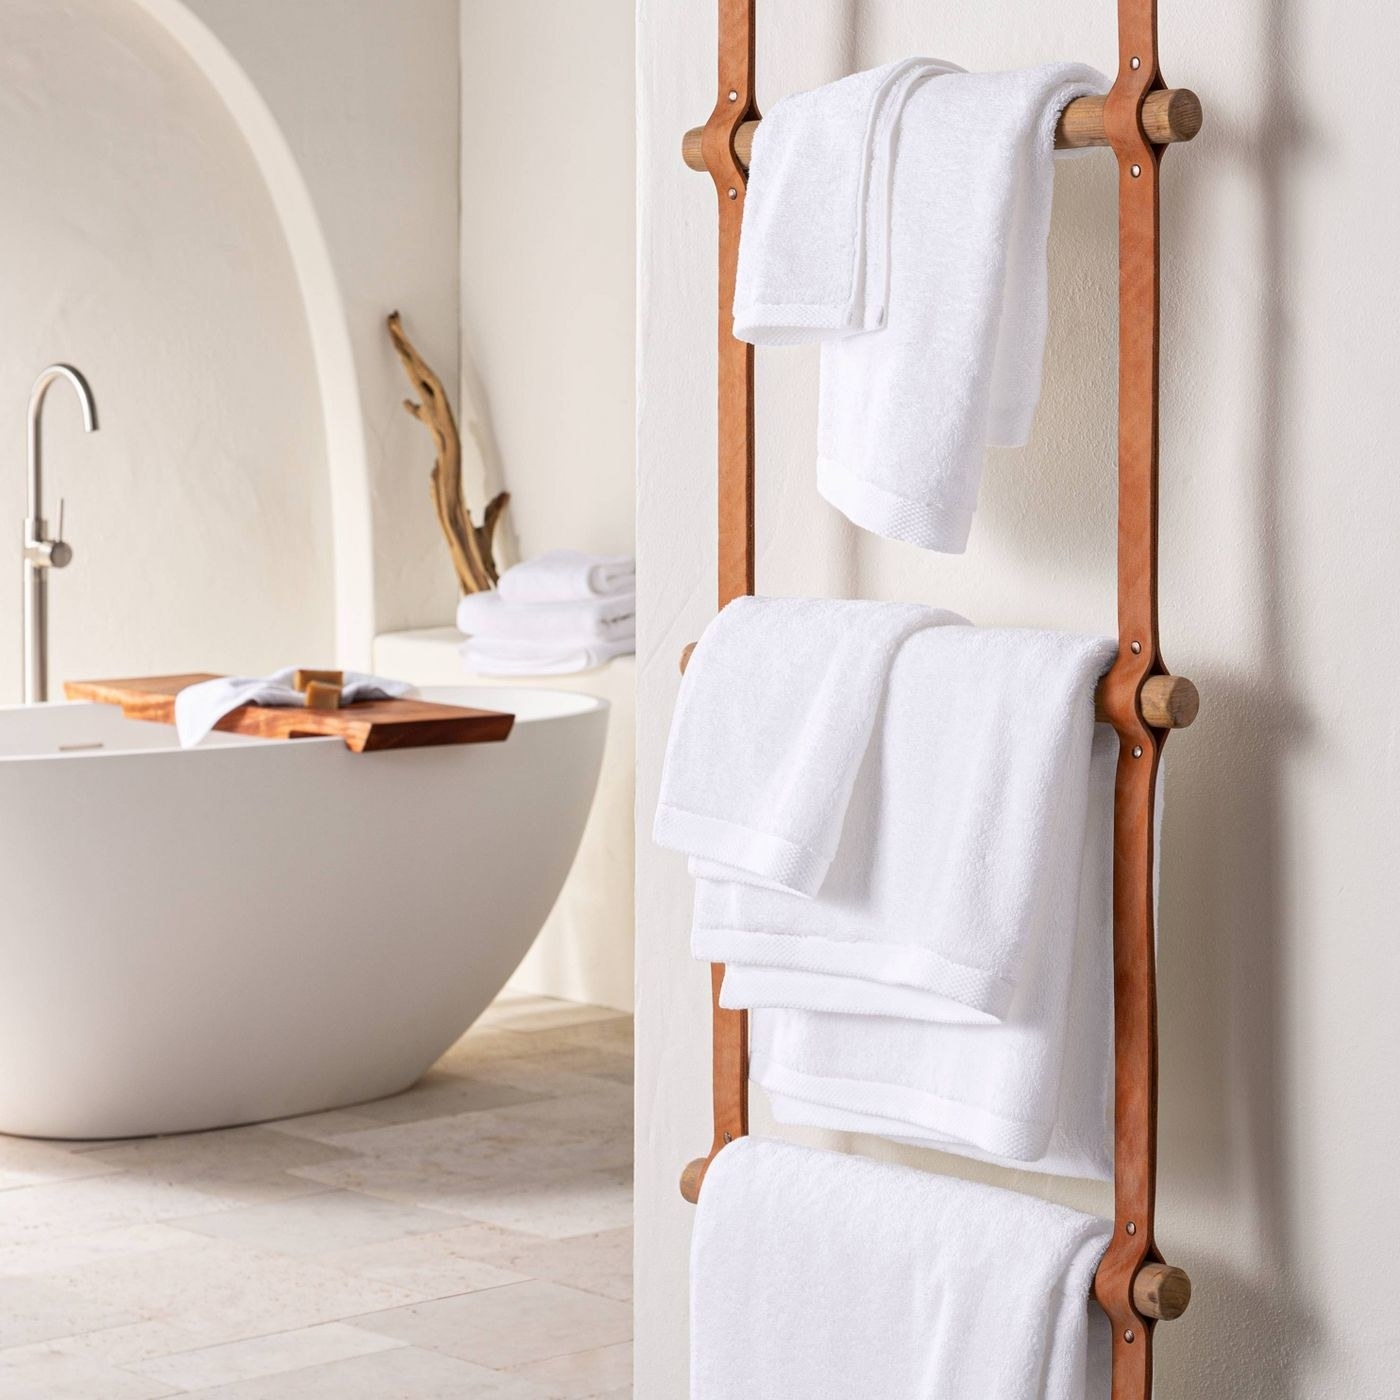 white towels of different sizes hung next to a bathtub